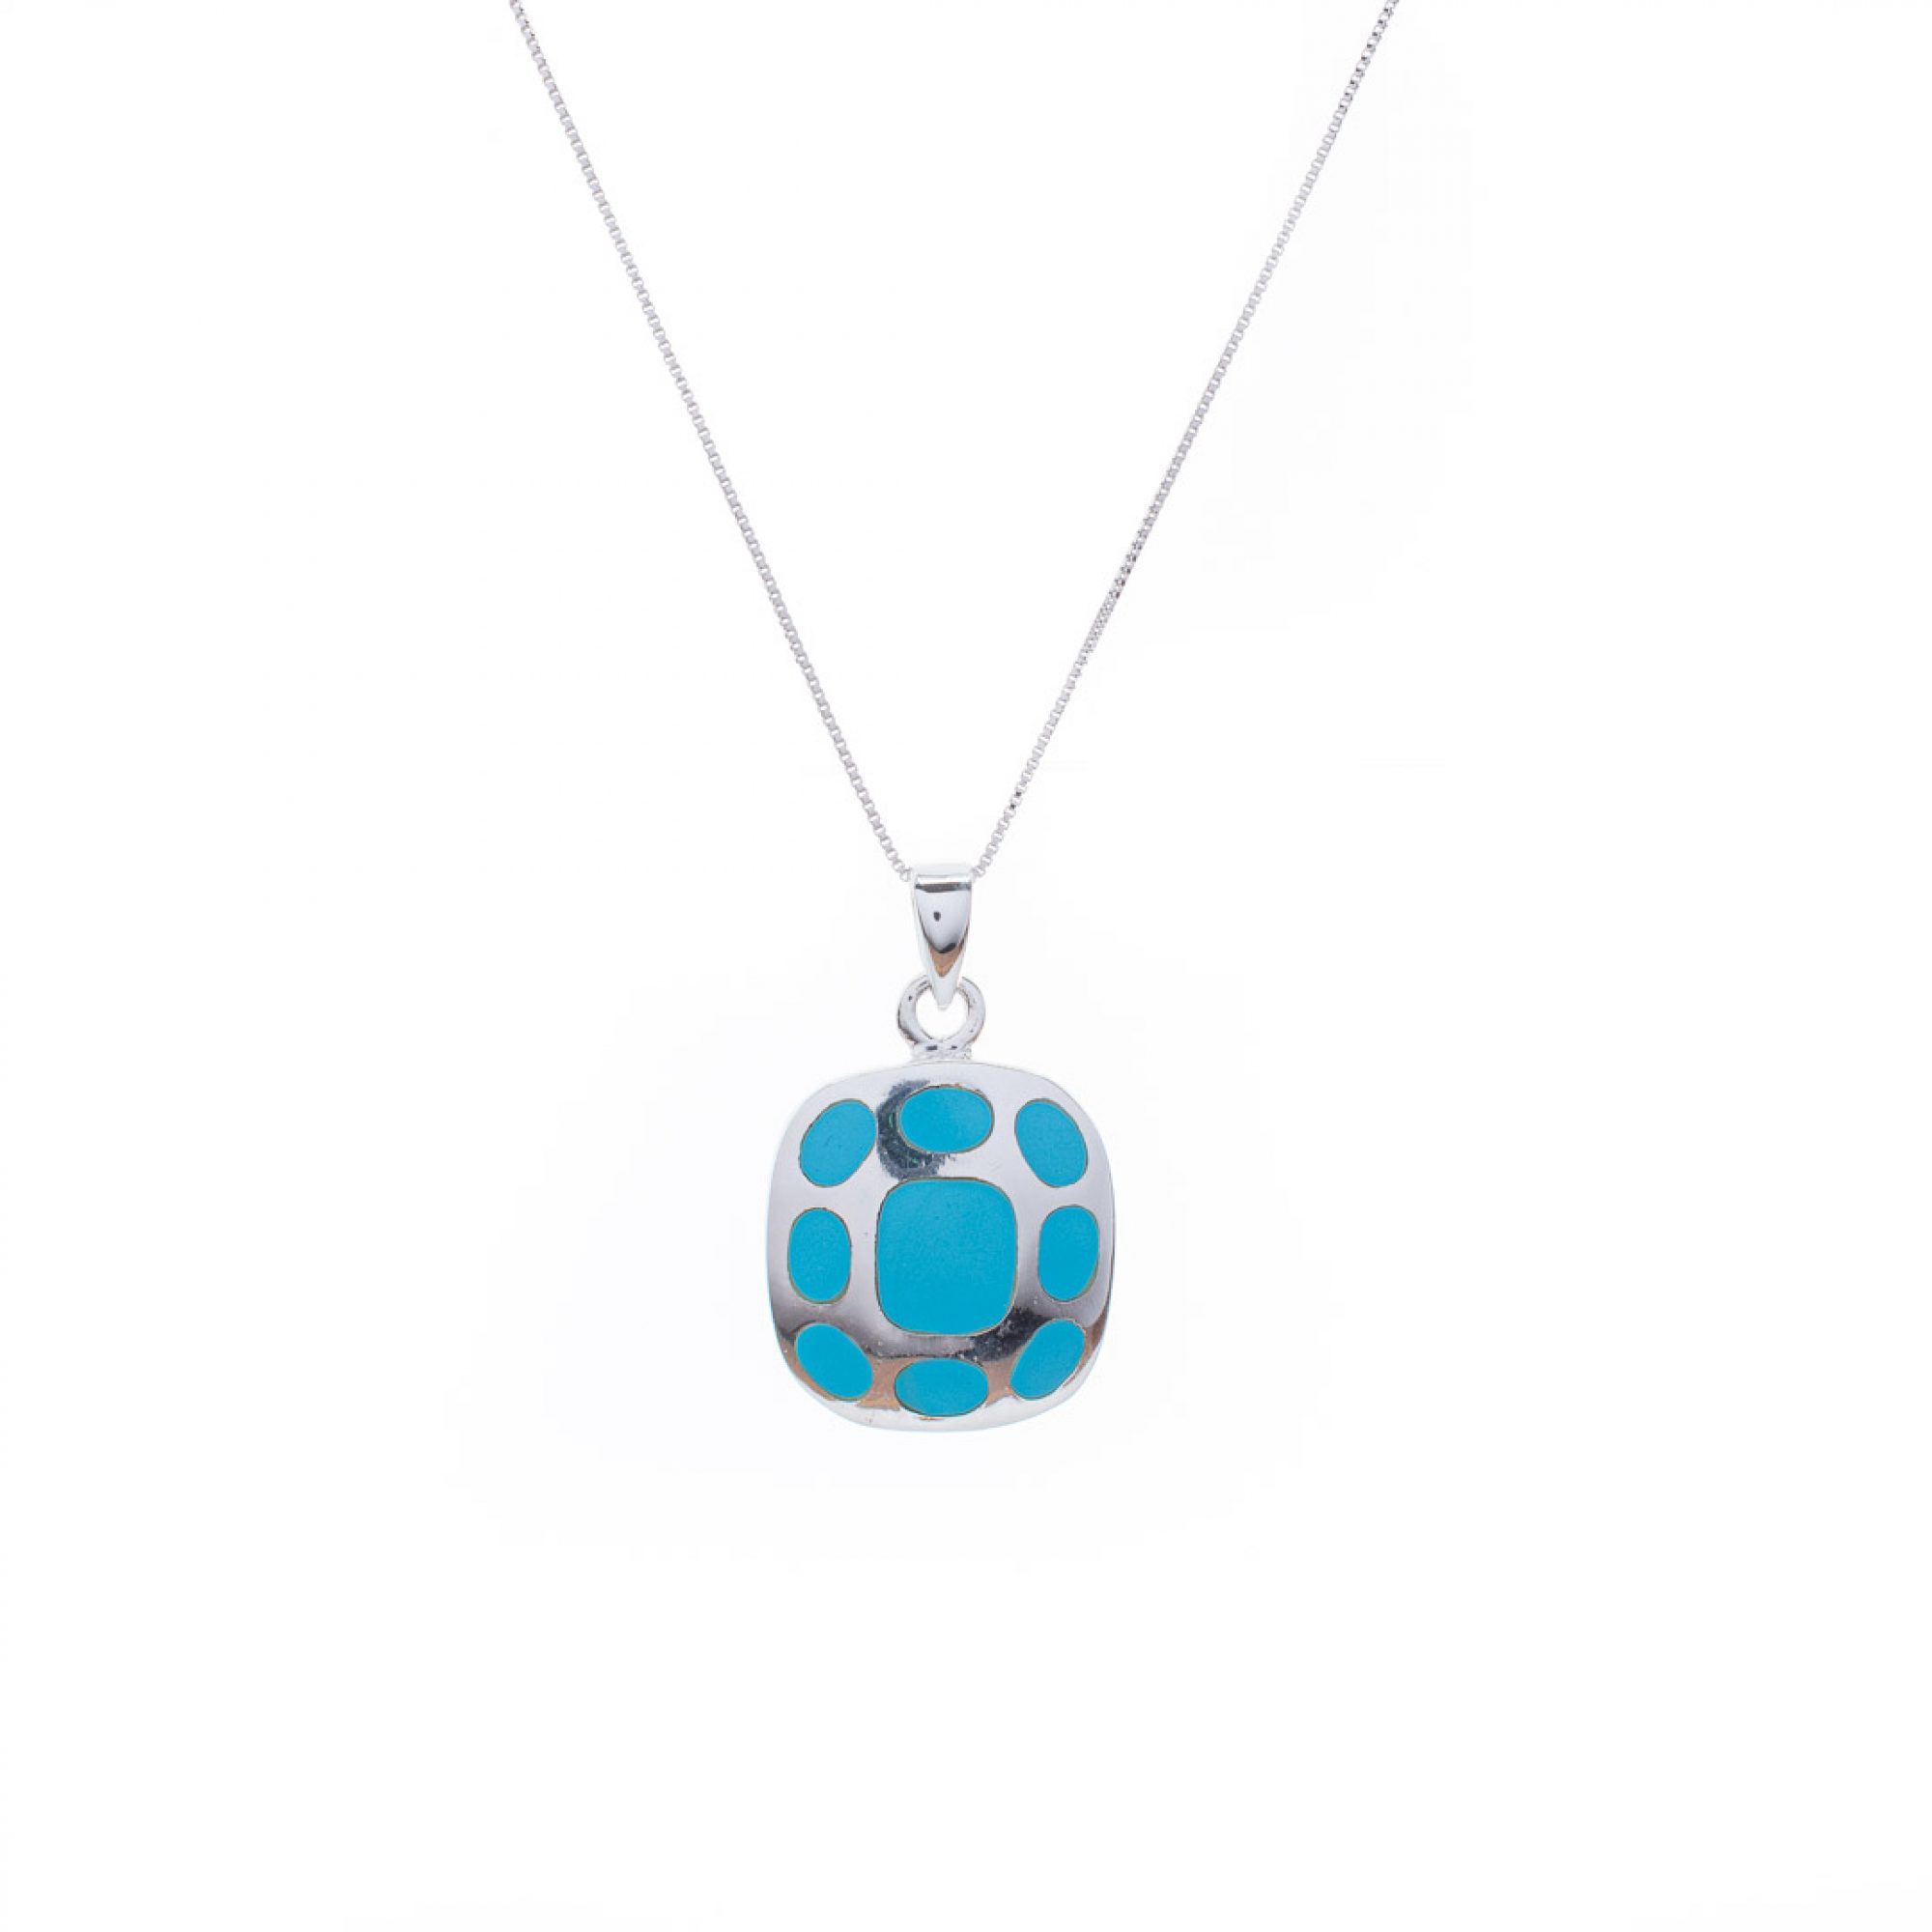 Necklace with natural turquoise stones